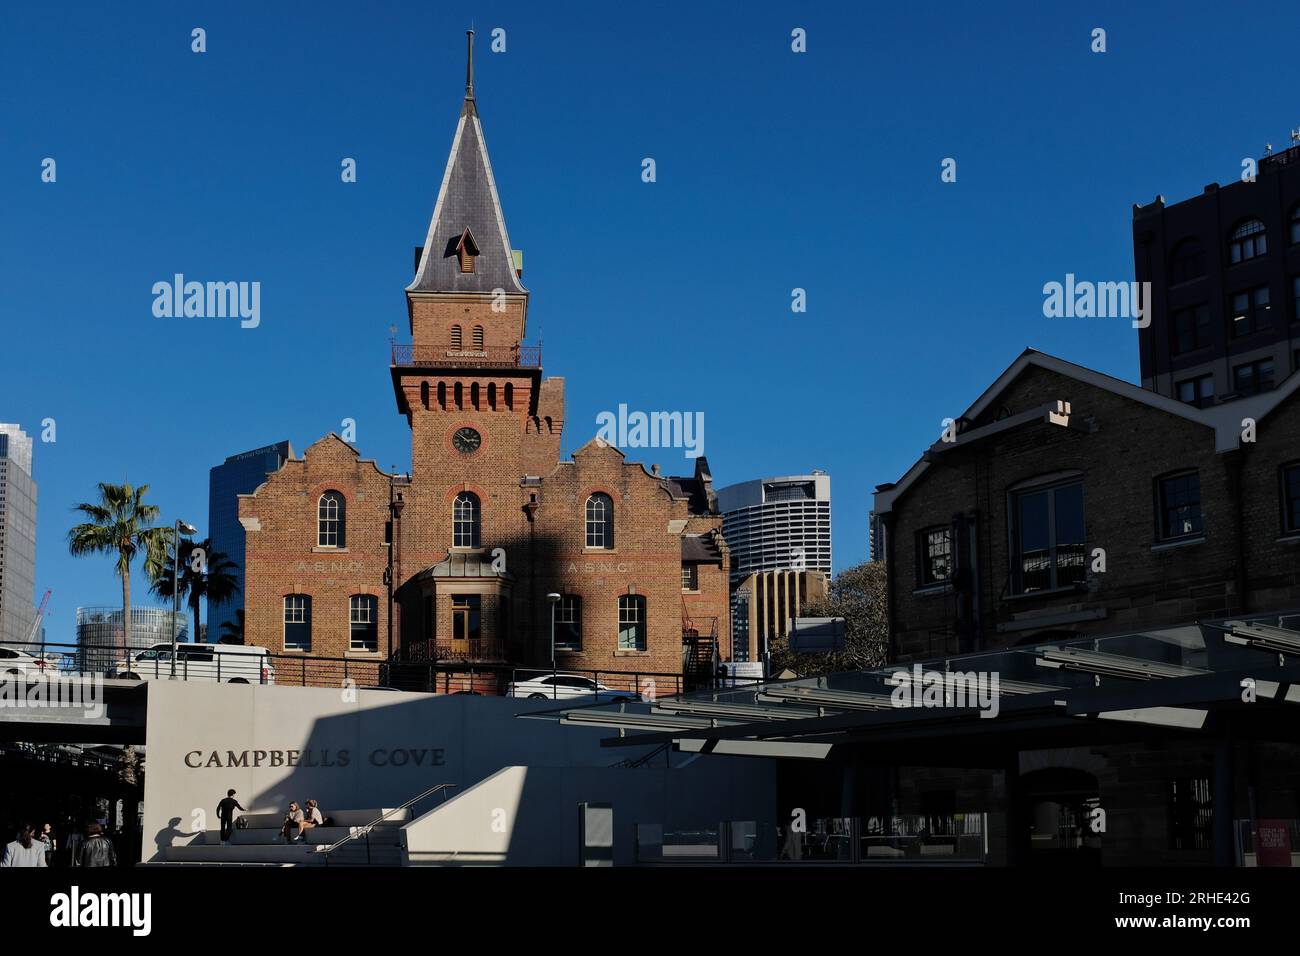 The Anglo Dutch style ASNCo Building at Campbell Cove, North façade, with clock tower contrasting coloured brickwork, bands of ochre, The Rocks Sydney Stock Photo